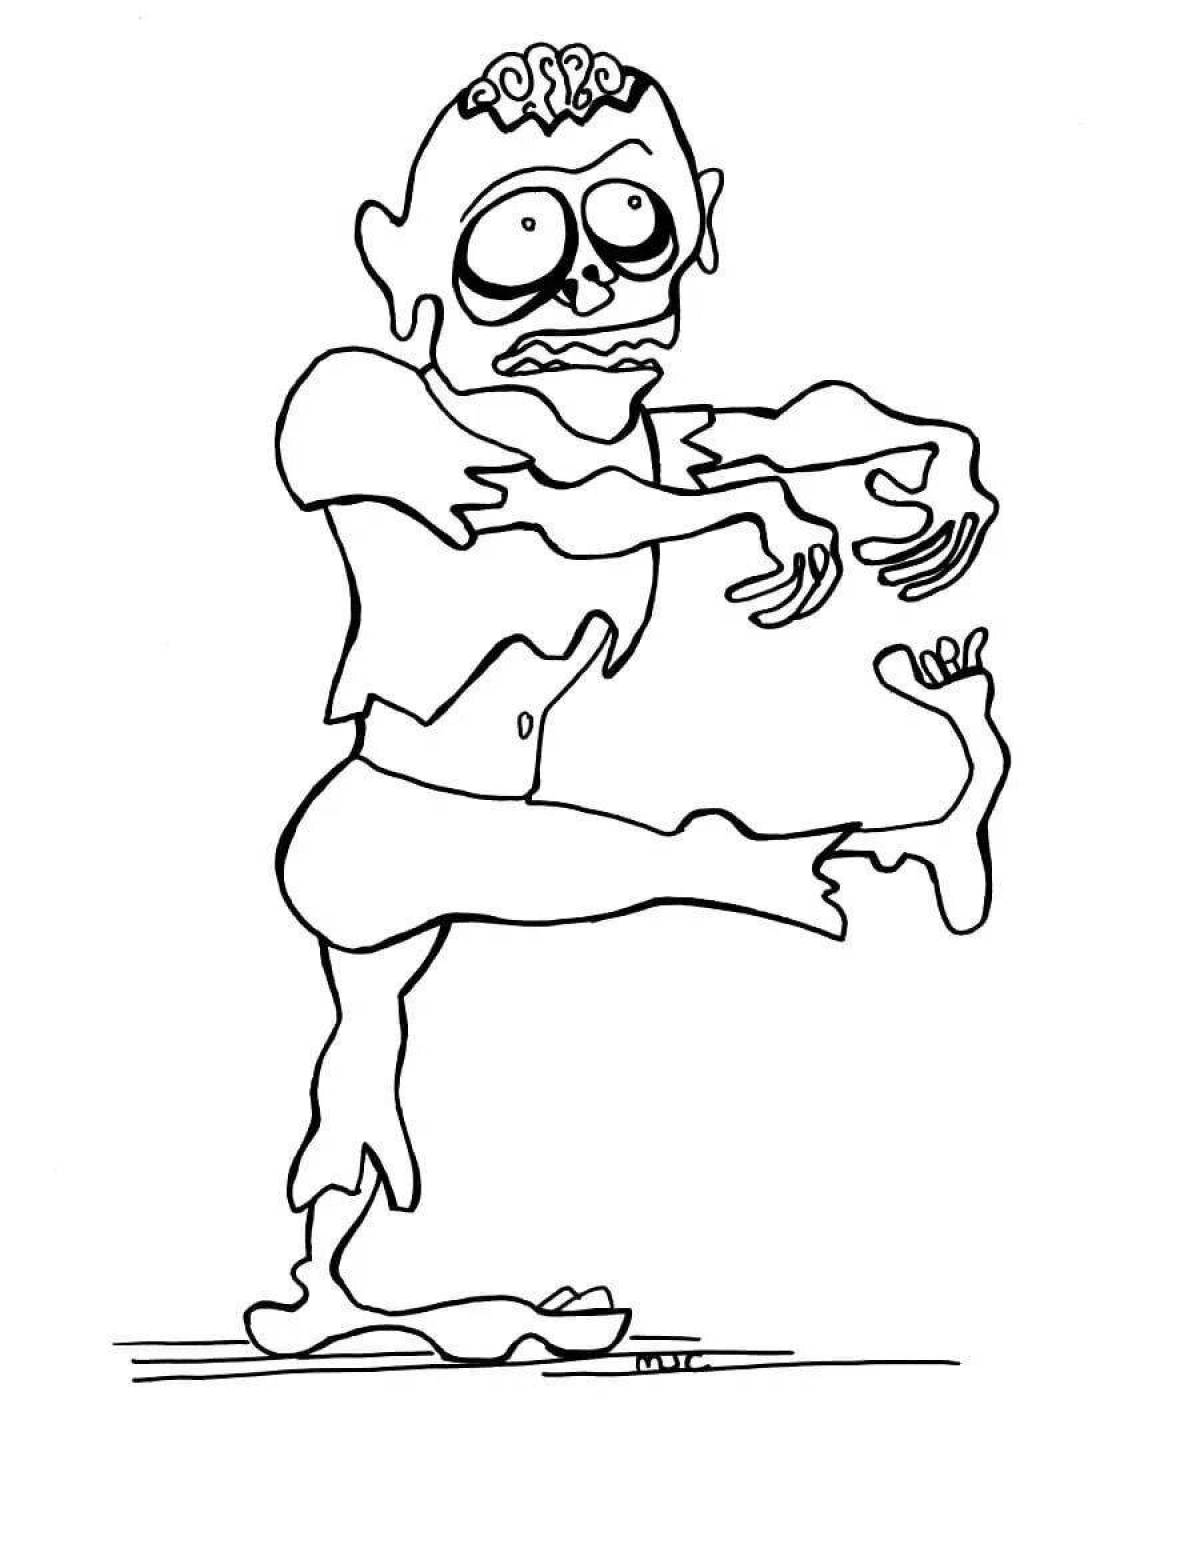 Sinister zombie coloring pages for kids